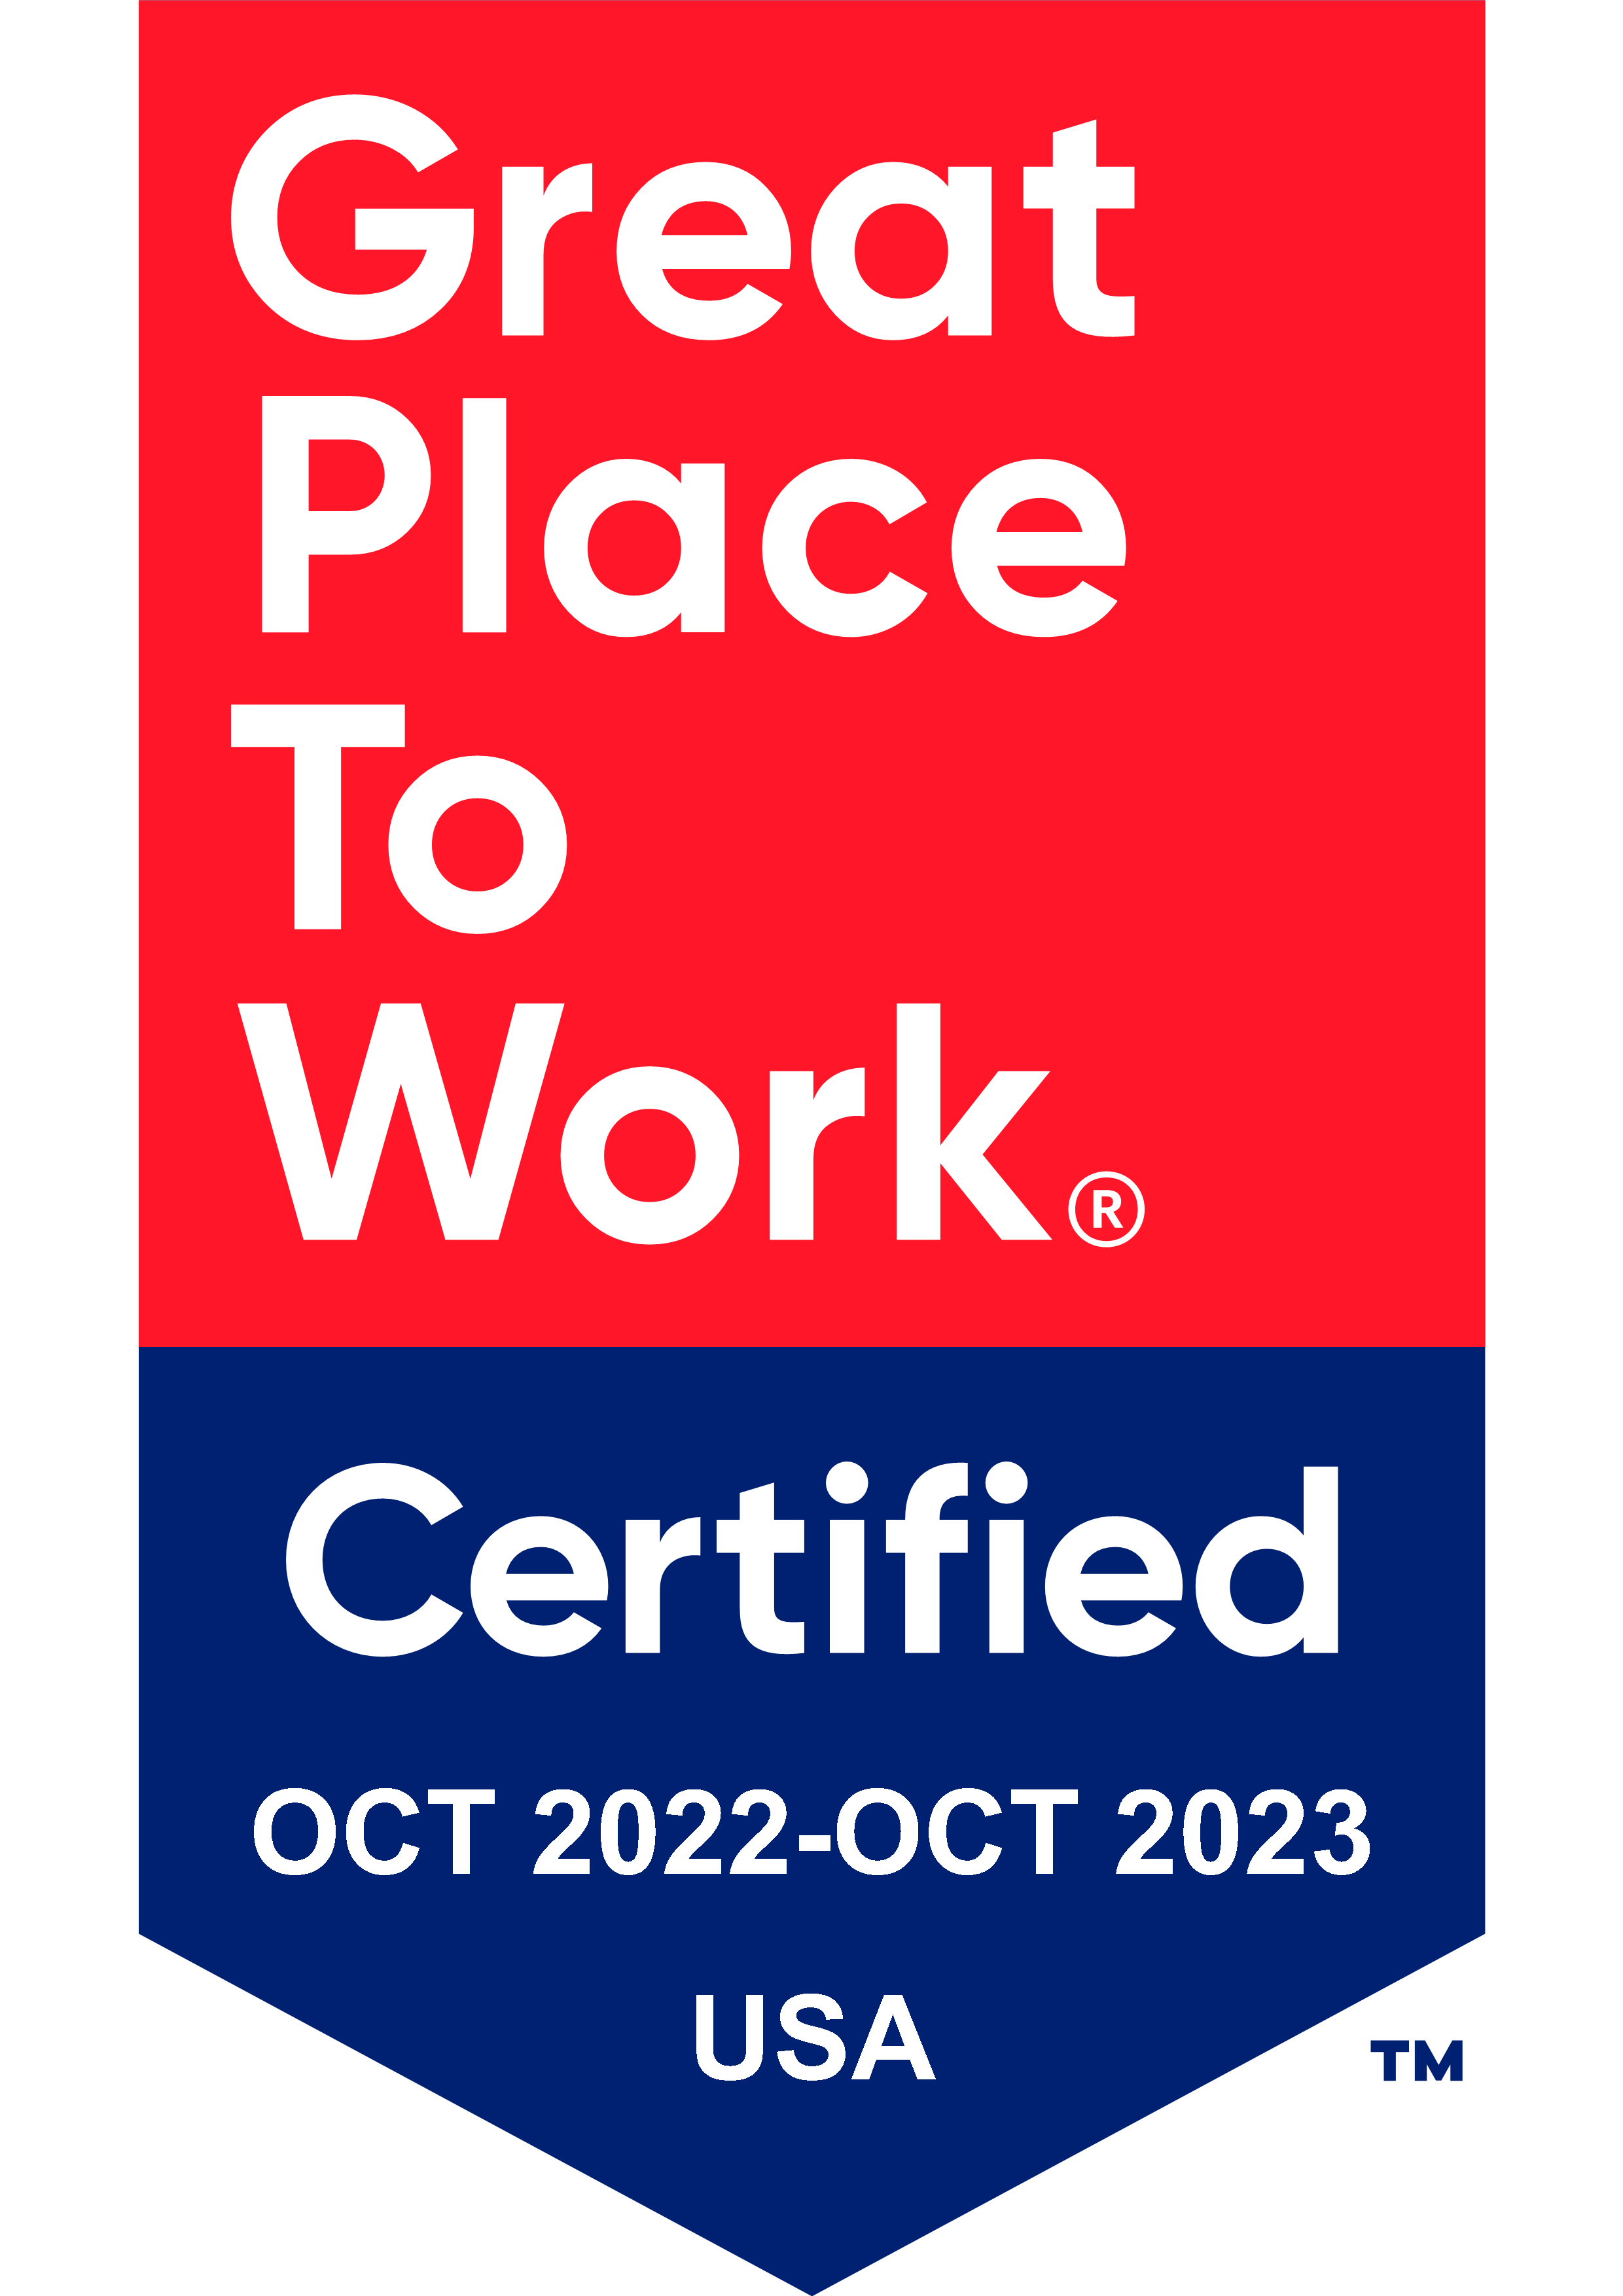 Fortune great place to work 2022 award